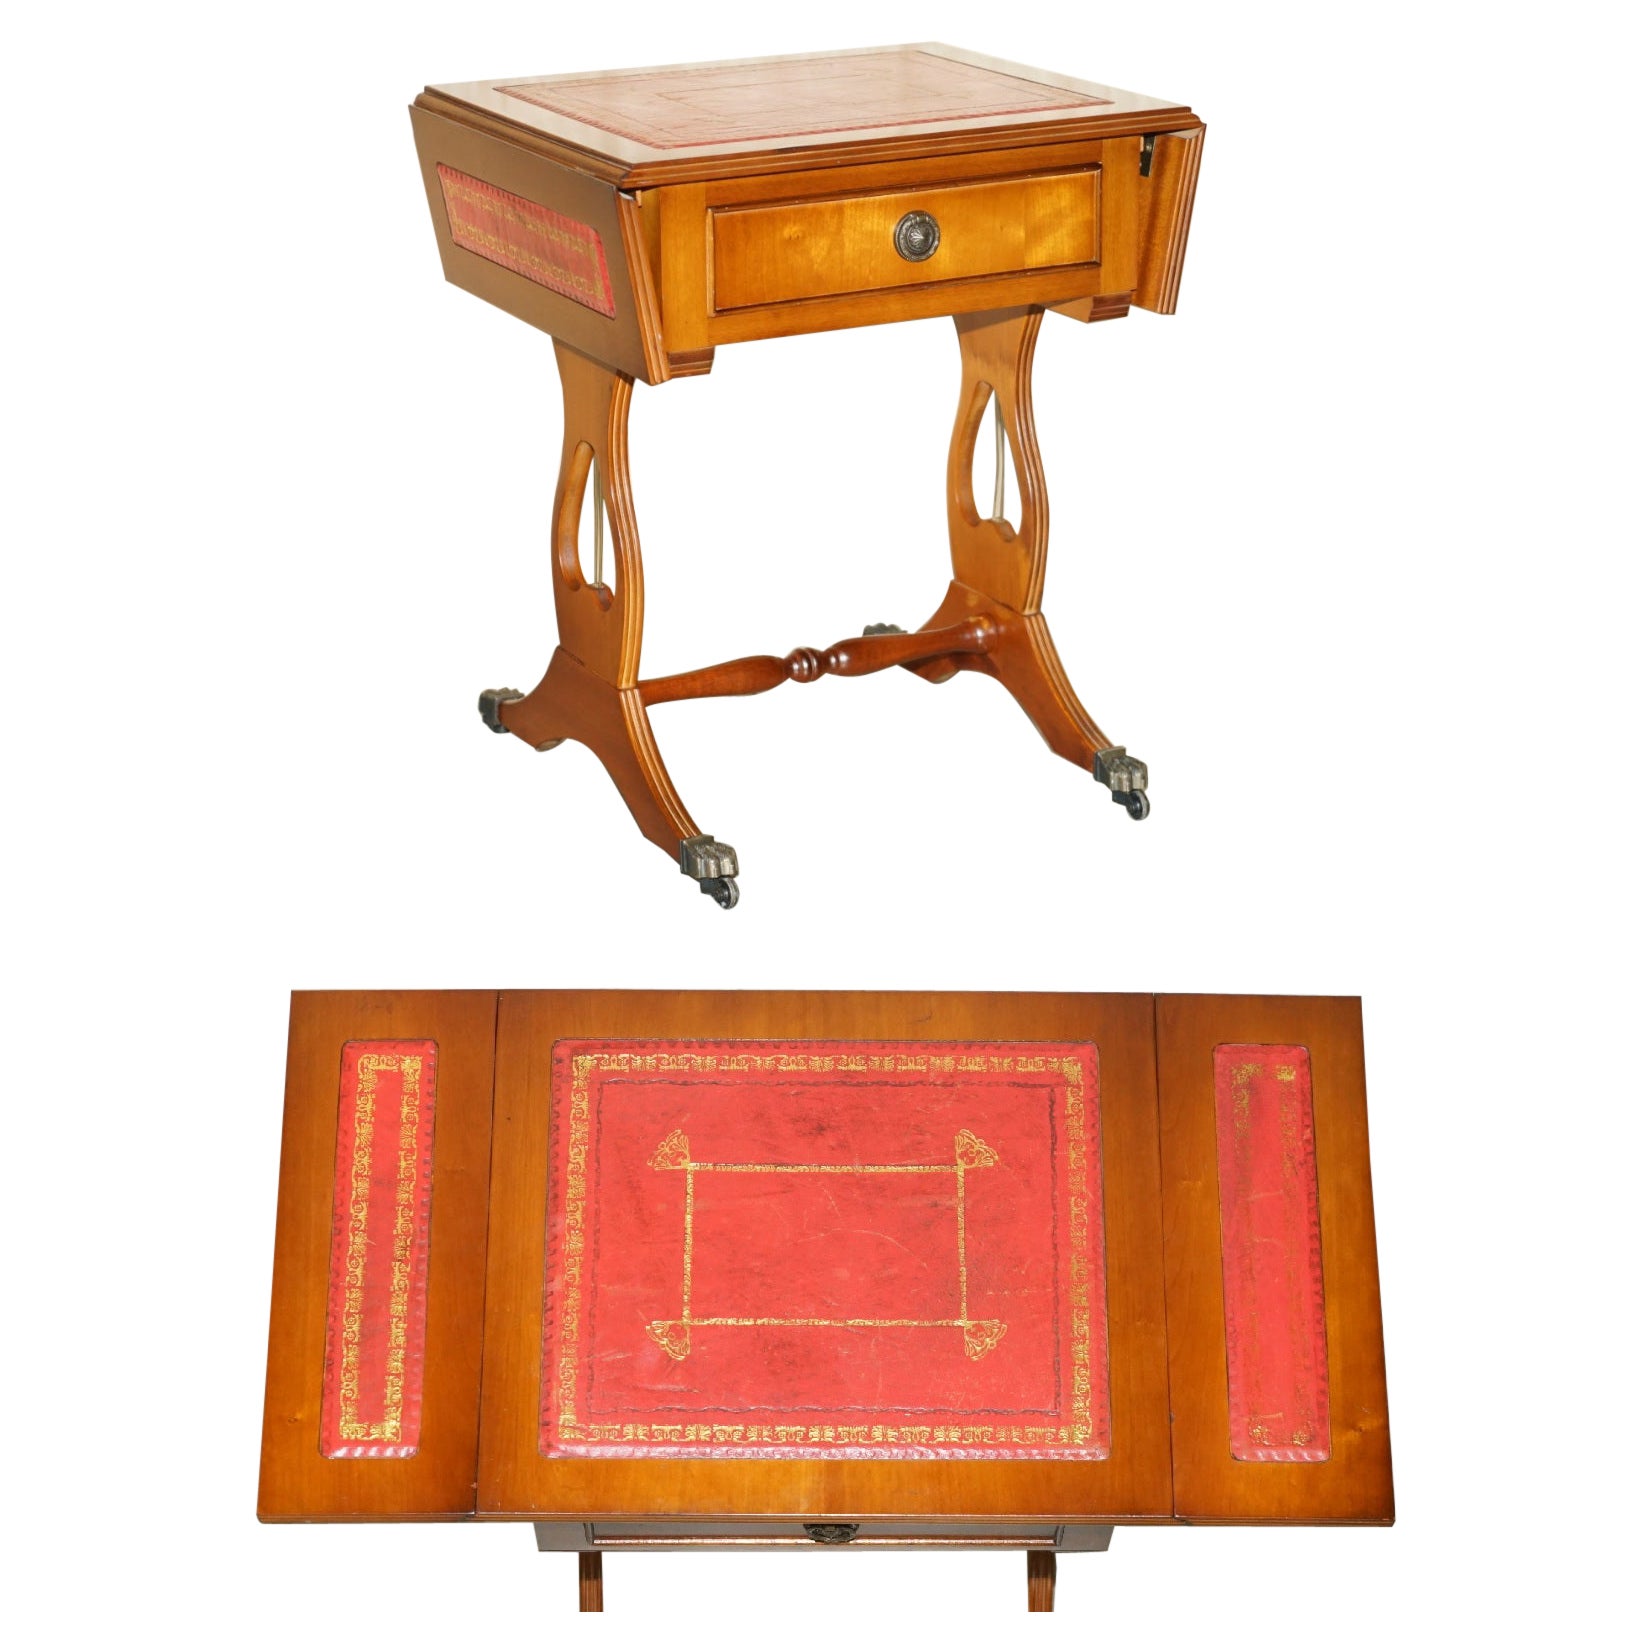 LOVELY ViNTAGE OXBLOOD LEATHER EXTENDING SIDE TABLE WITH GOLD LEAF INLAY For Sale